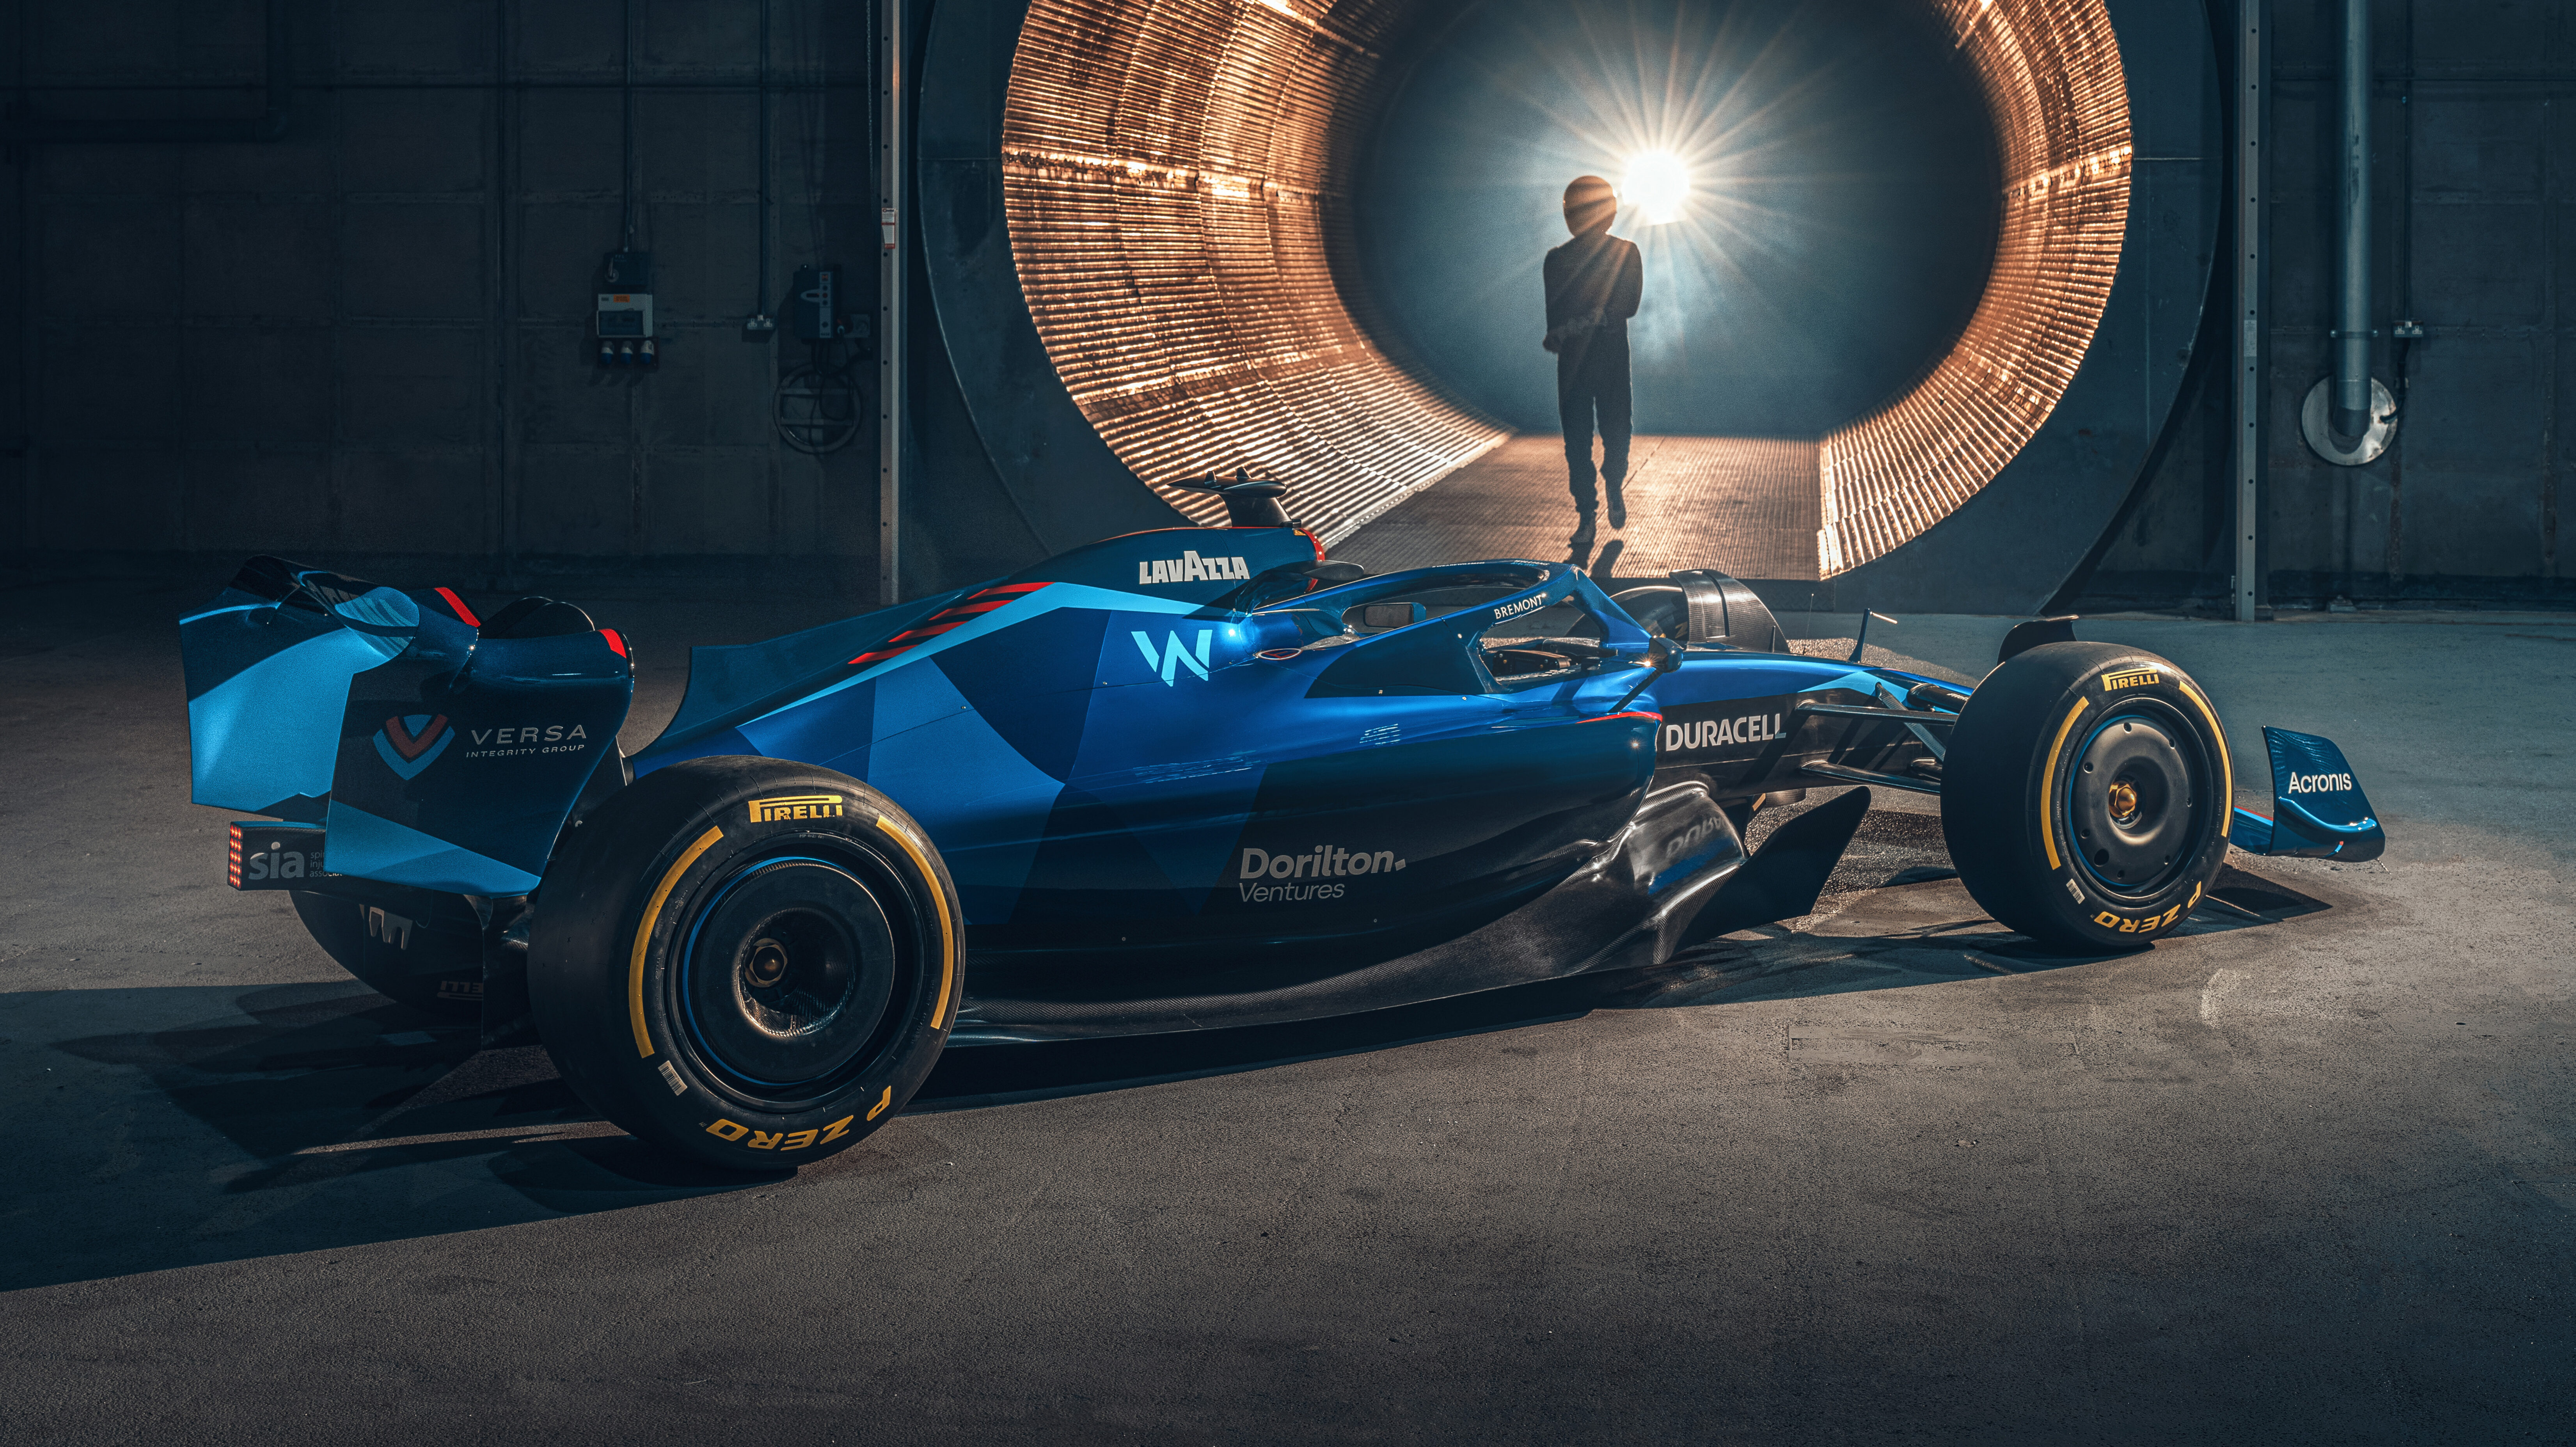 Williams reveal bold new look on 2022 F1 car